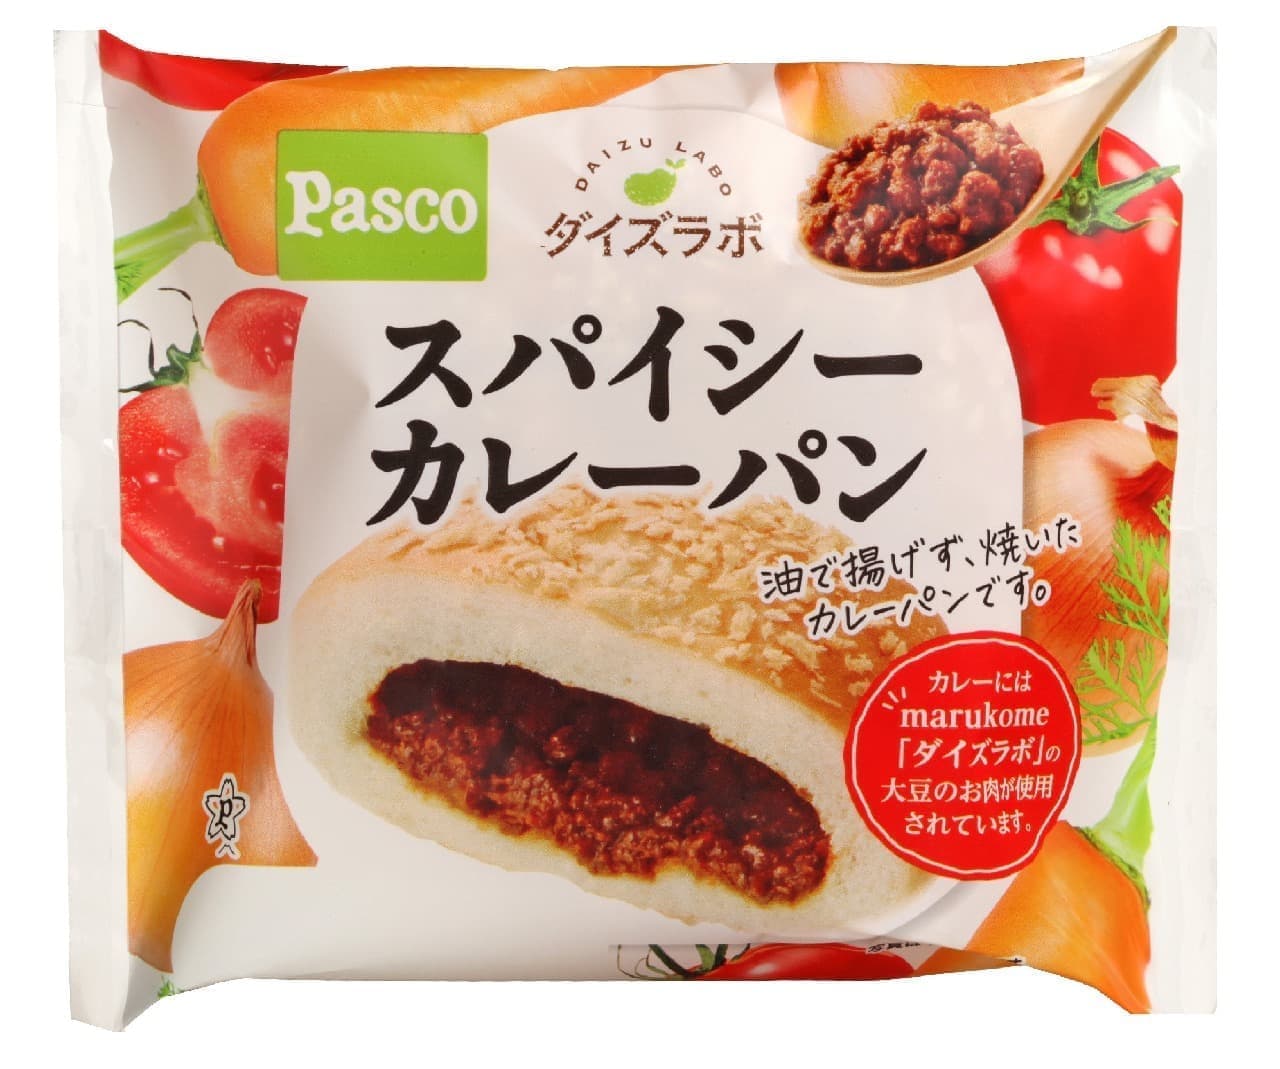 Pasco "Spicy Curry Bread"